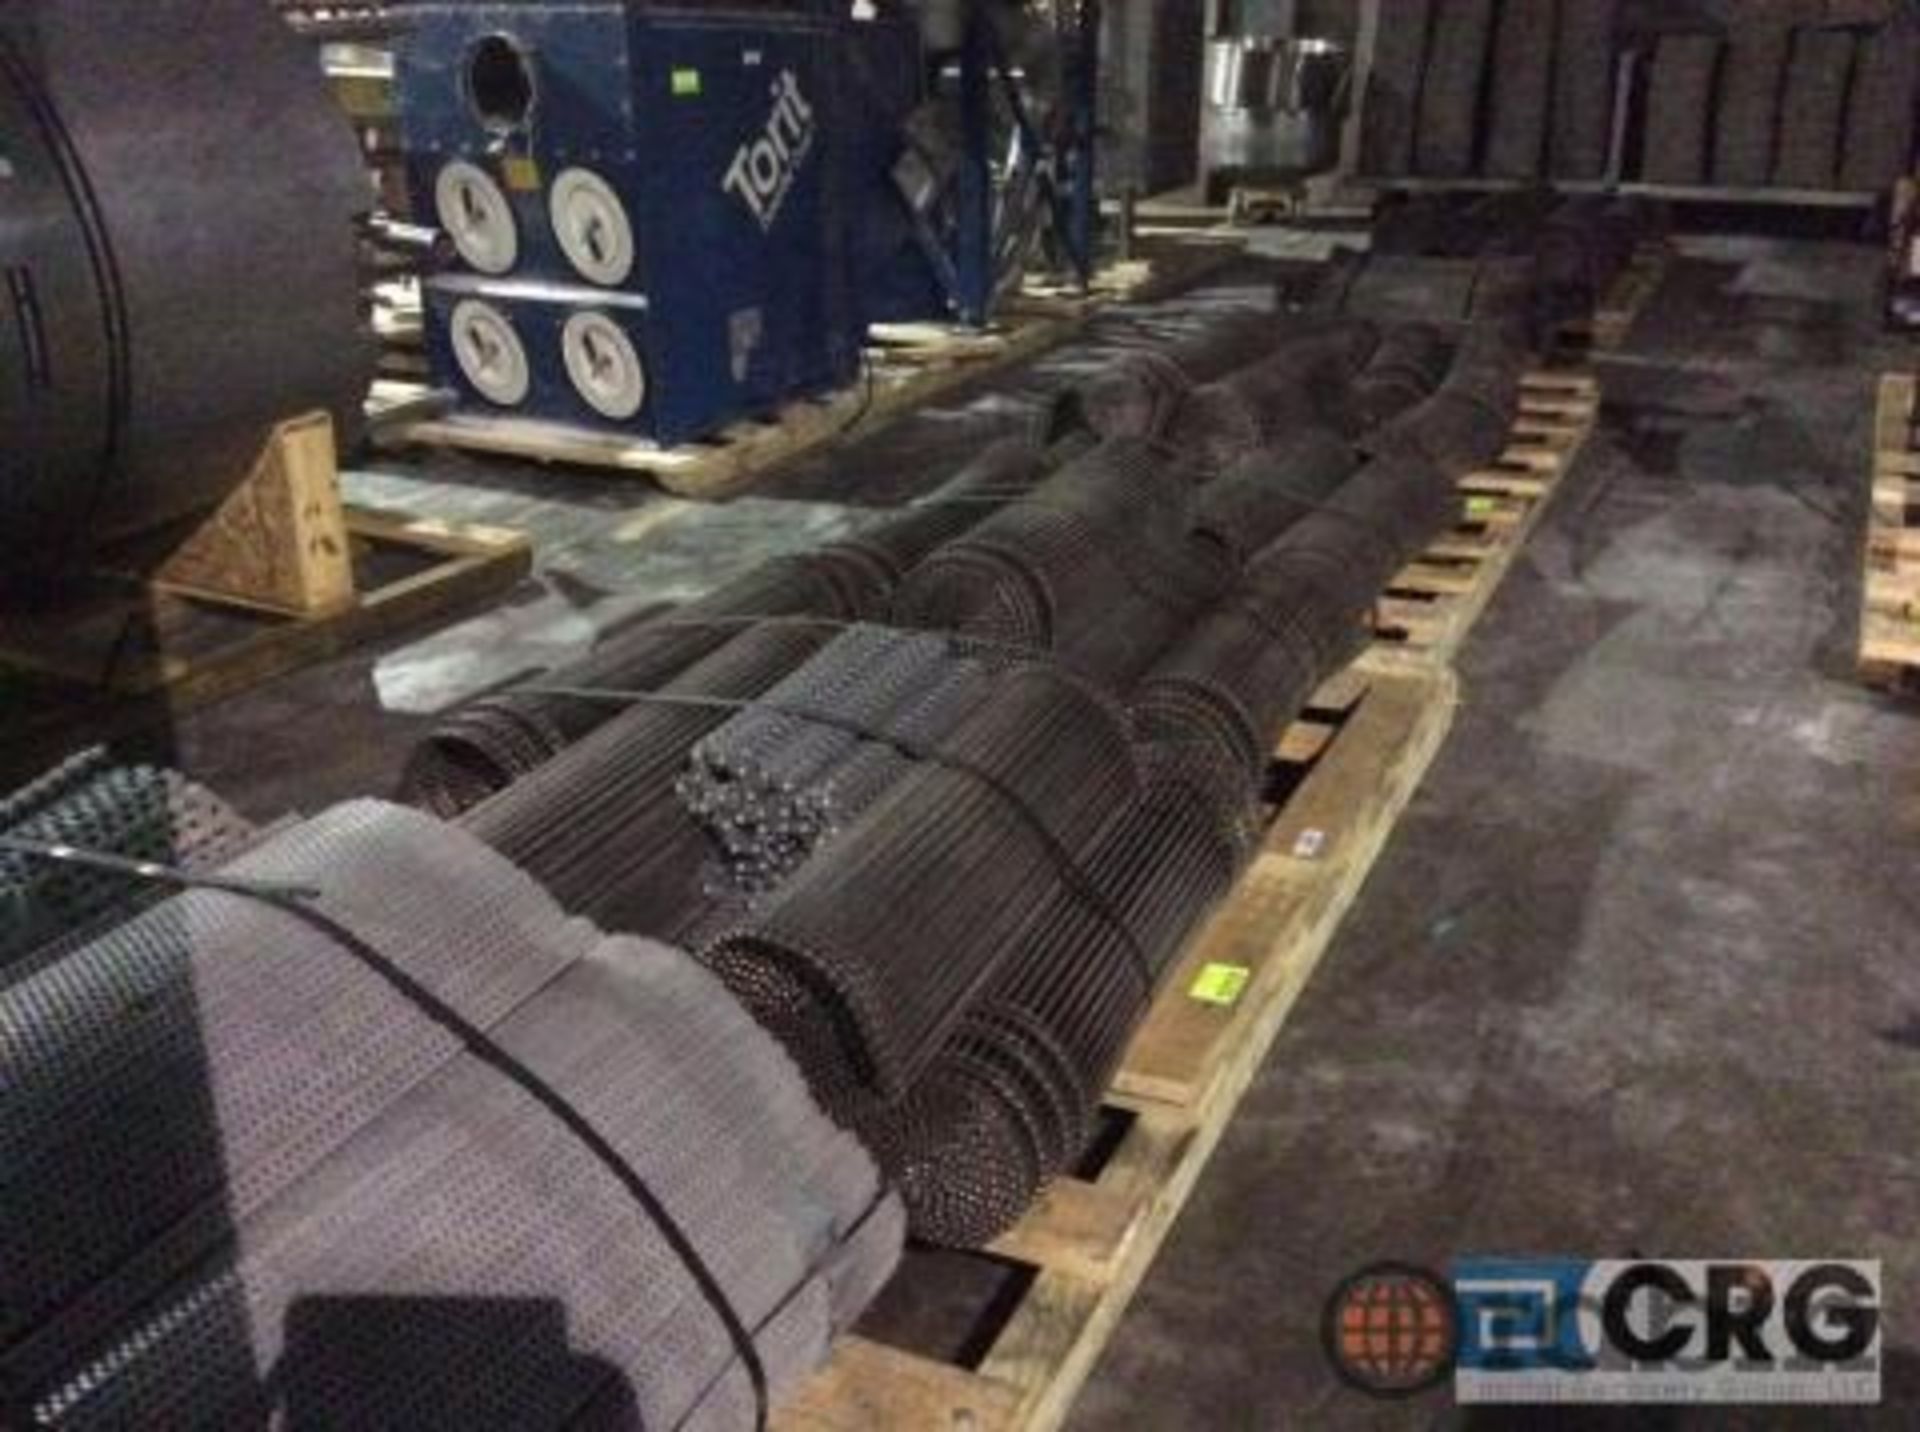 Lot of steel rod belt conveyors, contents of (3) pallets and (1) crate [Atlanta] - Image 2 of 3